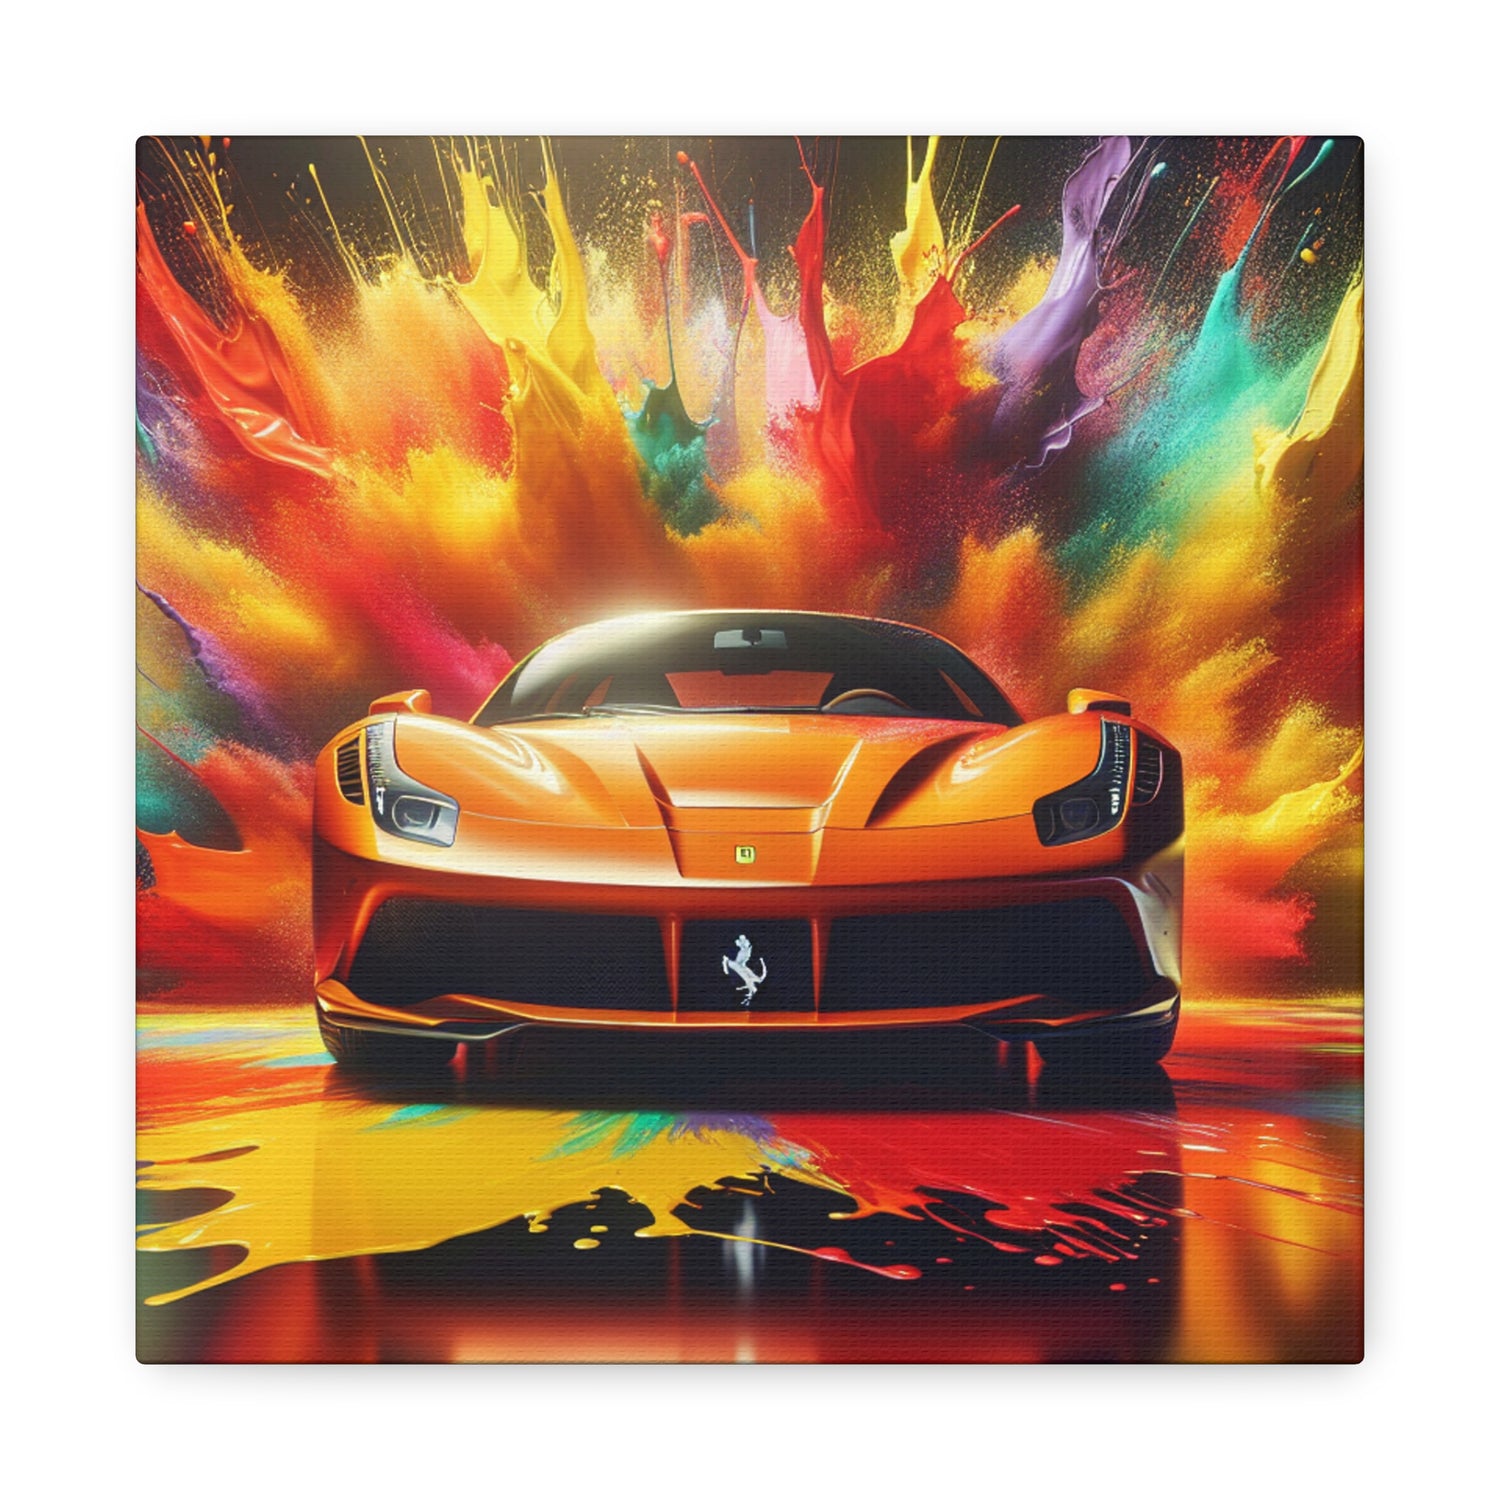 Ferrari Canva Painting, Luxury Car Artwork, Wall Decor, Handmade Piece, Perfect for Home and Office, Ideal Gift for Car Enthusiasts